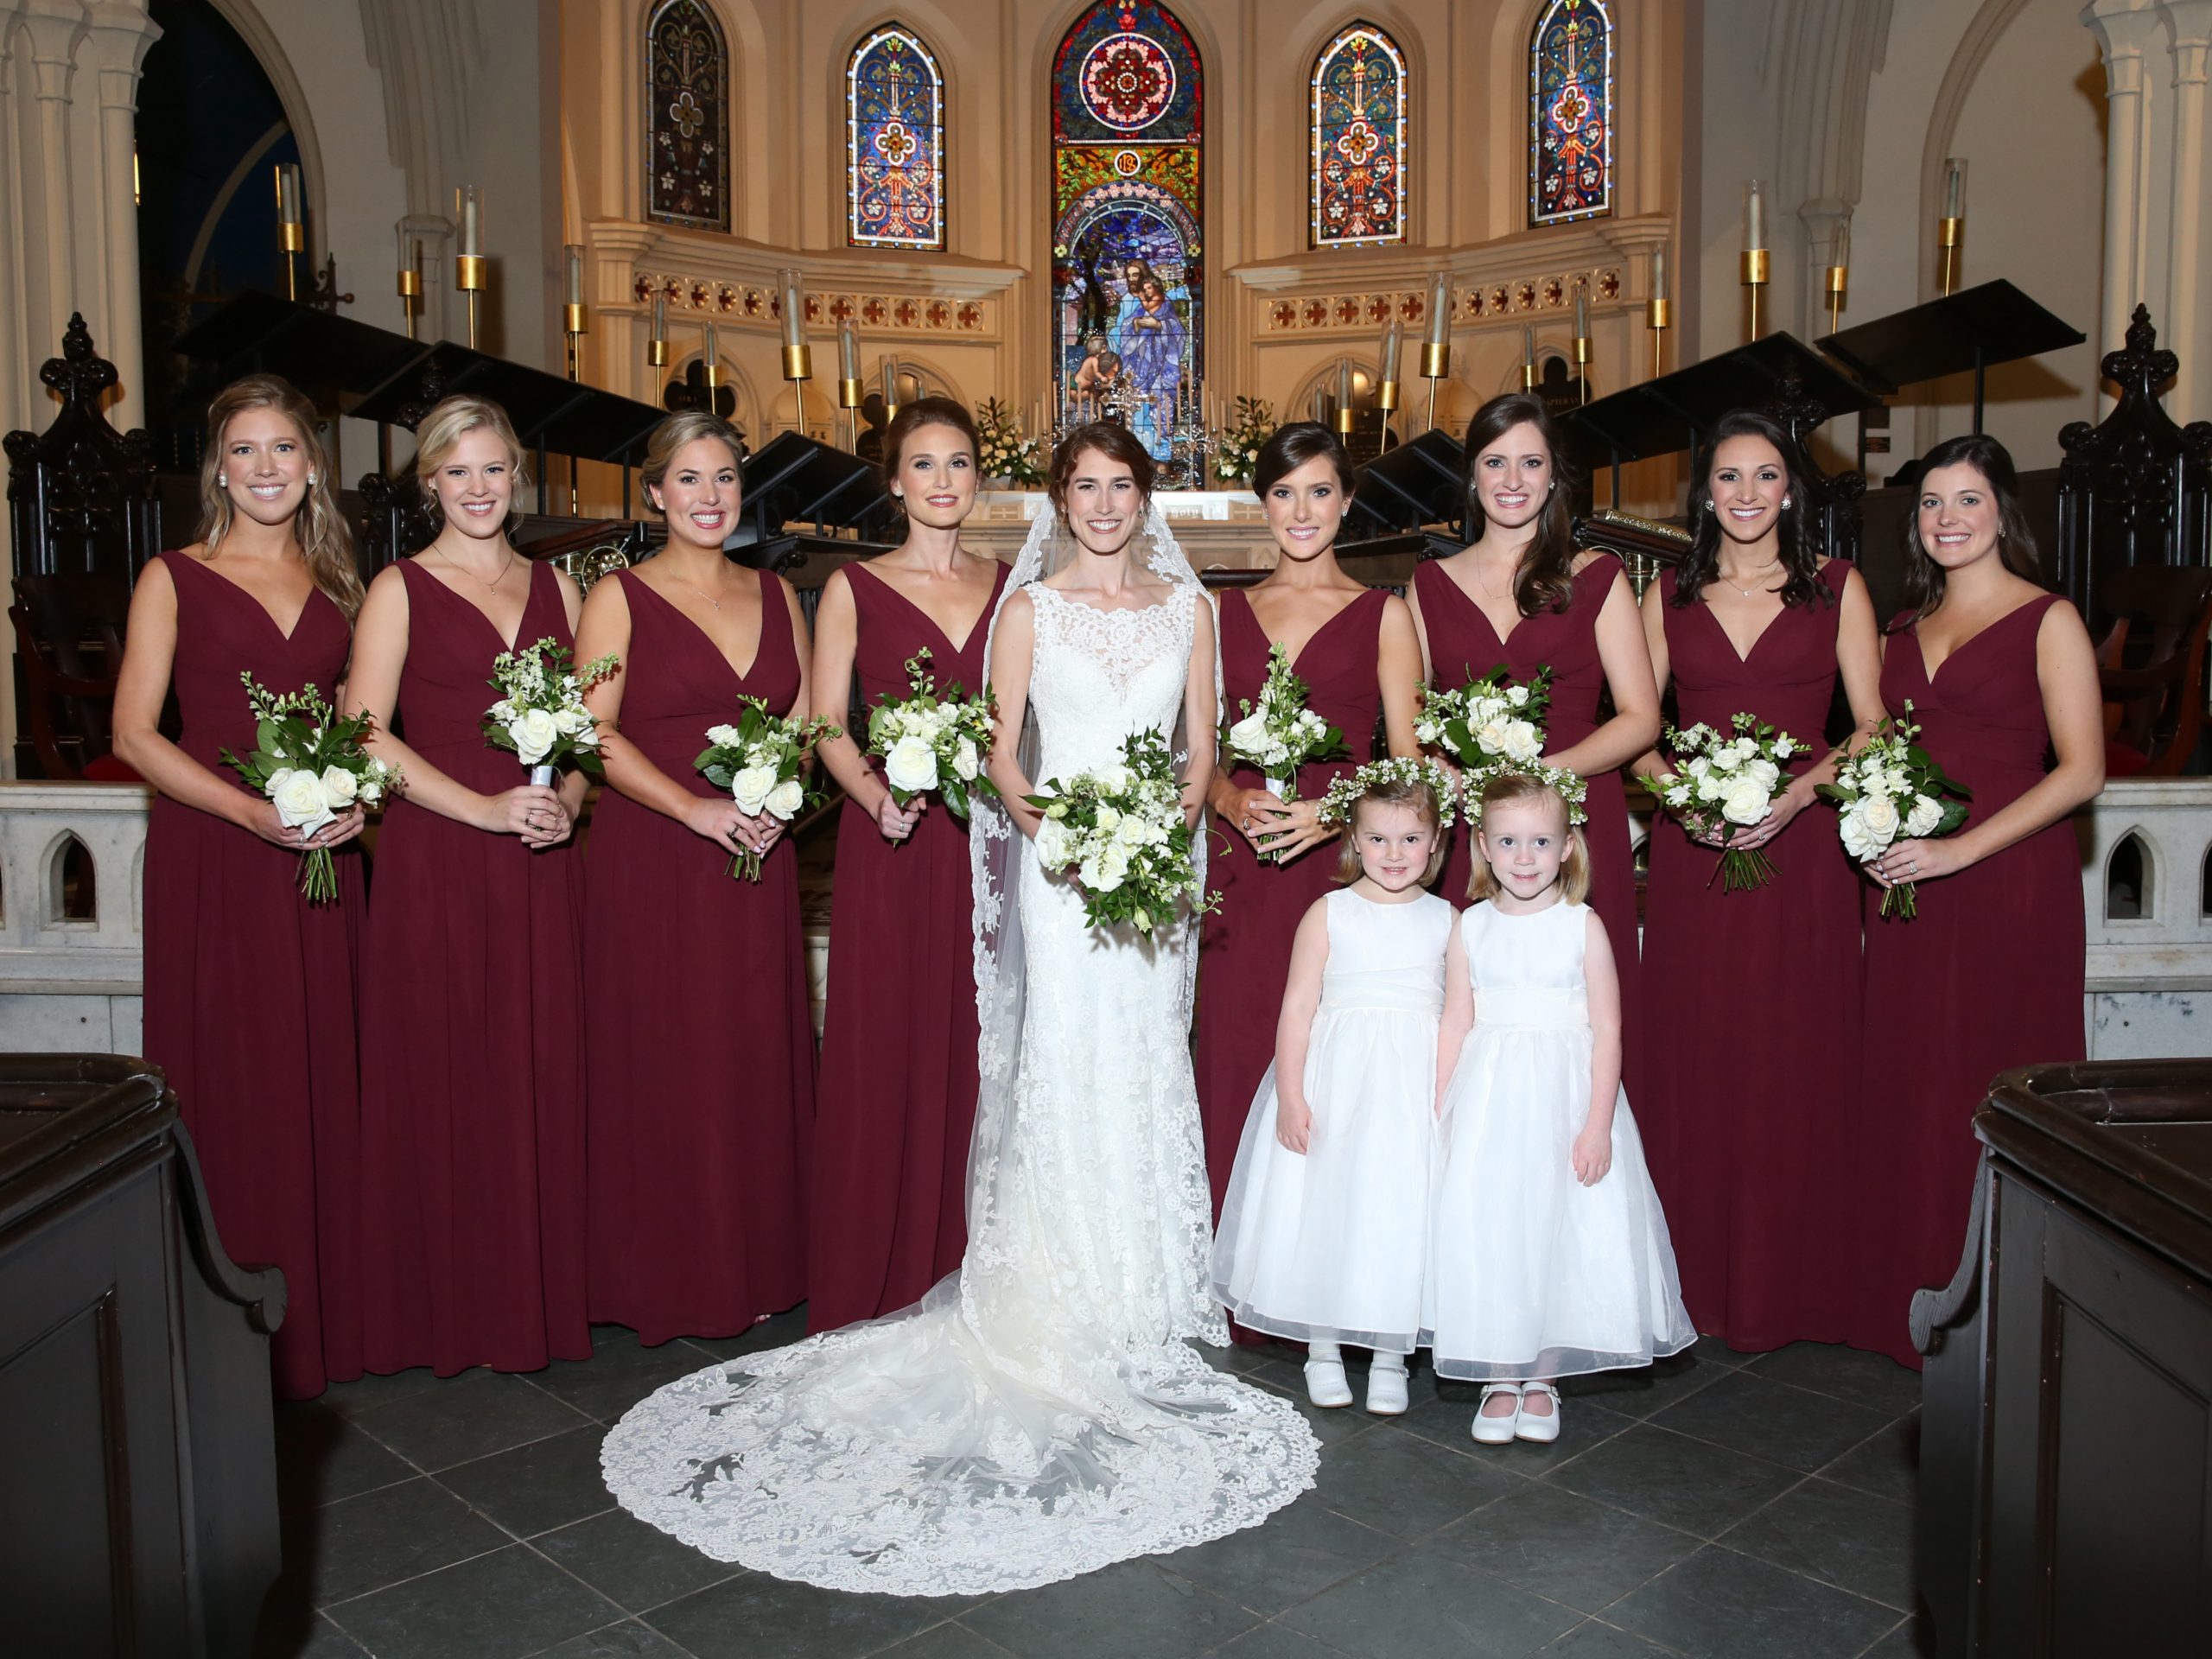 The bridal party included Claire Holt, Sammy Cavanaugh, Lucy Boyle, Emily Welling, Caroline Welling Jones, Mary Louise Jones, Rebecca Givens, Rachel Postal, and Claire Strasburger. Children of the bride’s cousins from Alabama, Anna Wells Wallace and Murphy Parker, served as flower girls. 